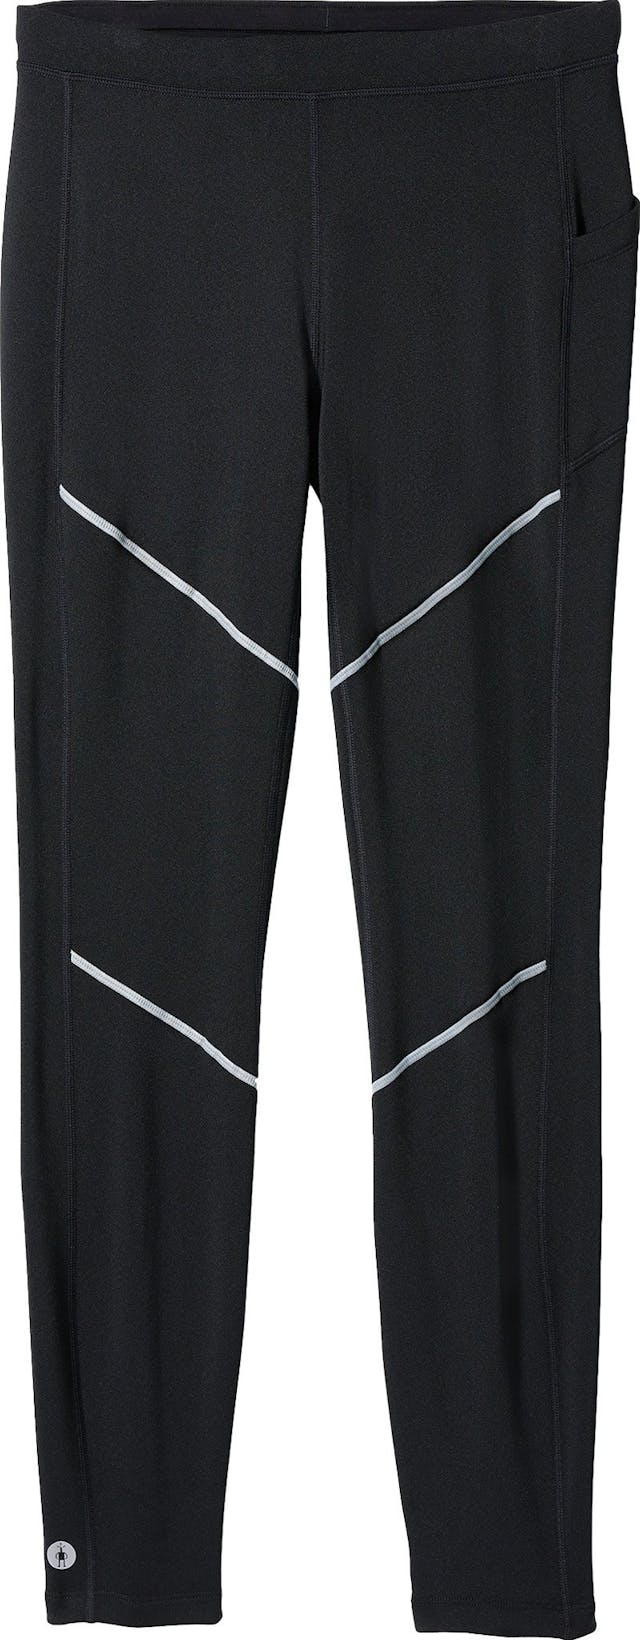 Product image for Active Fleece Tights - Men’s